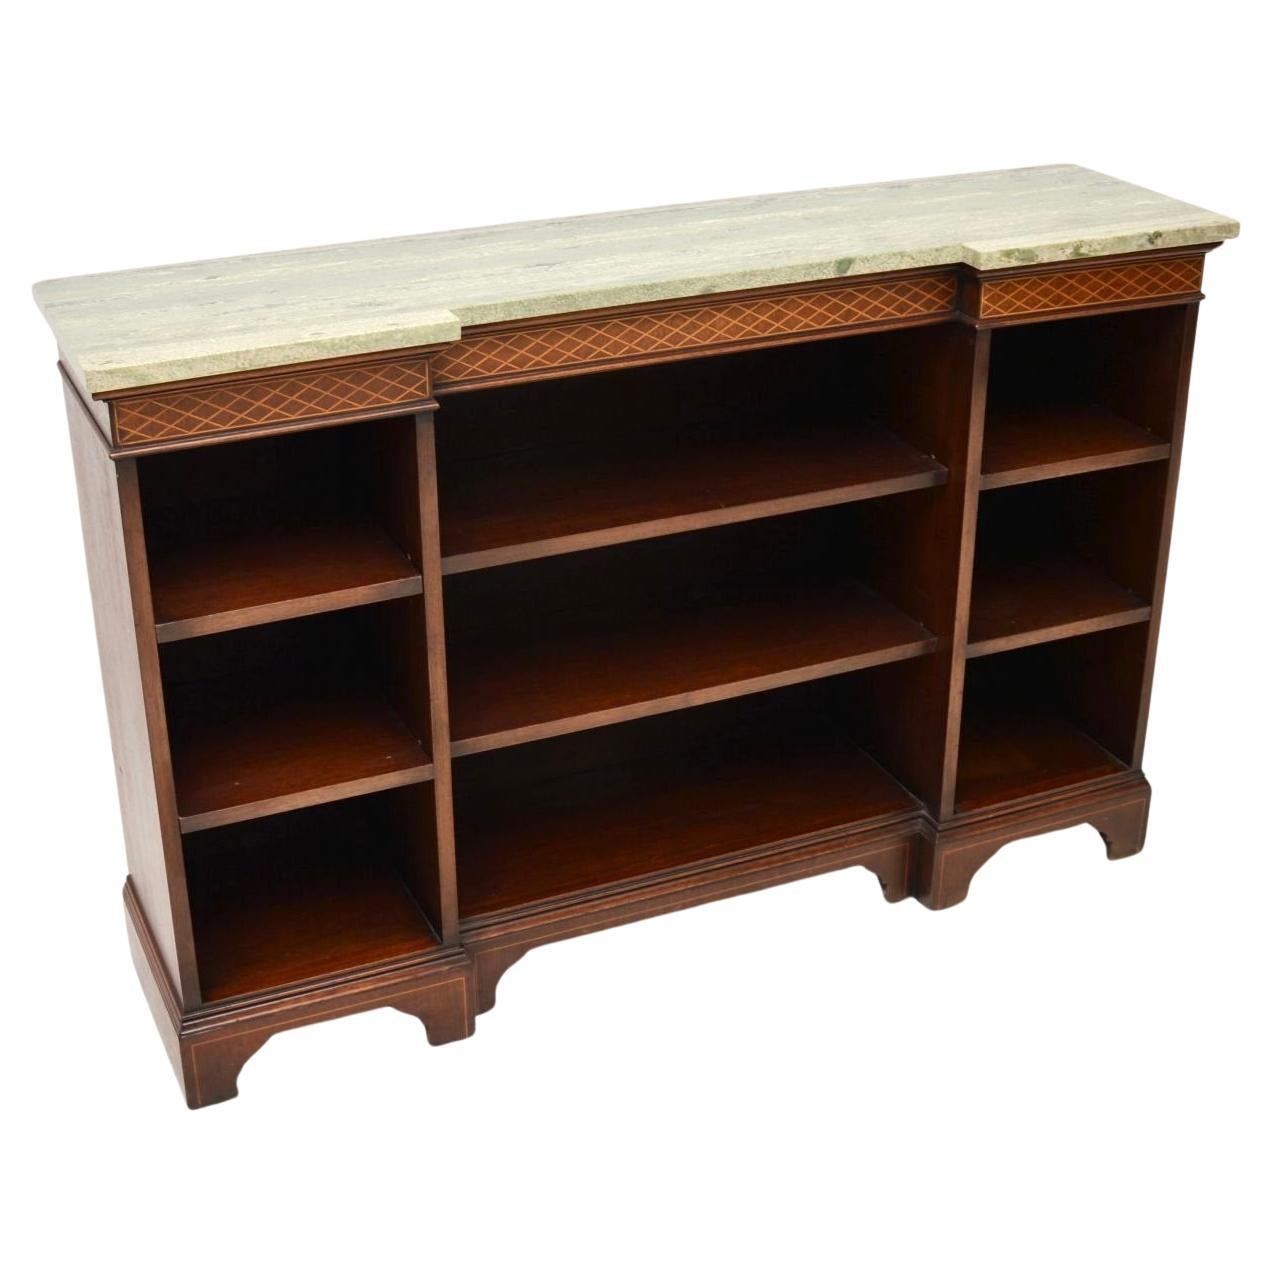 Antique Marble Top Open Bookcase / Sideboard For Sale